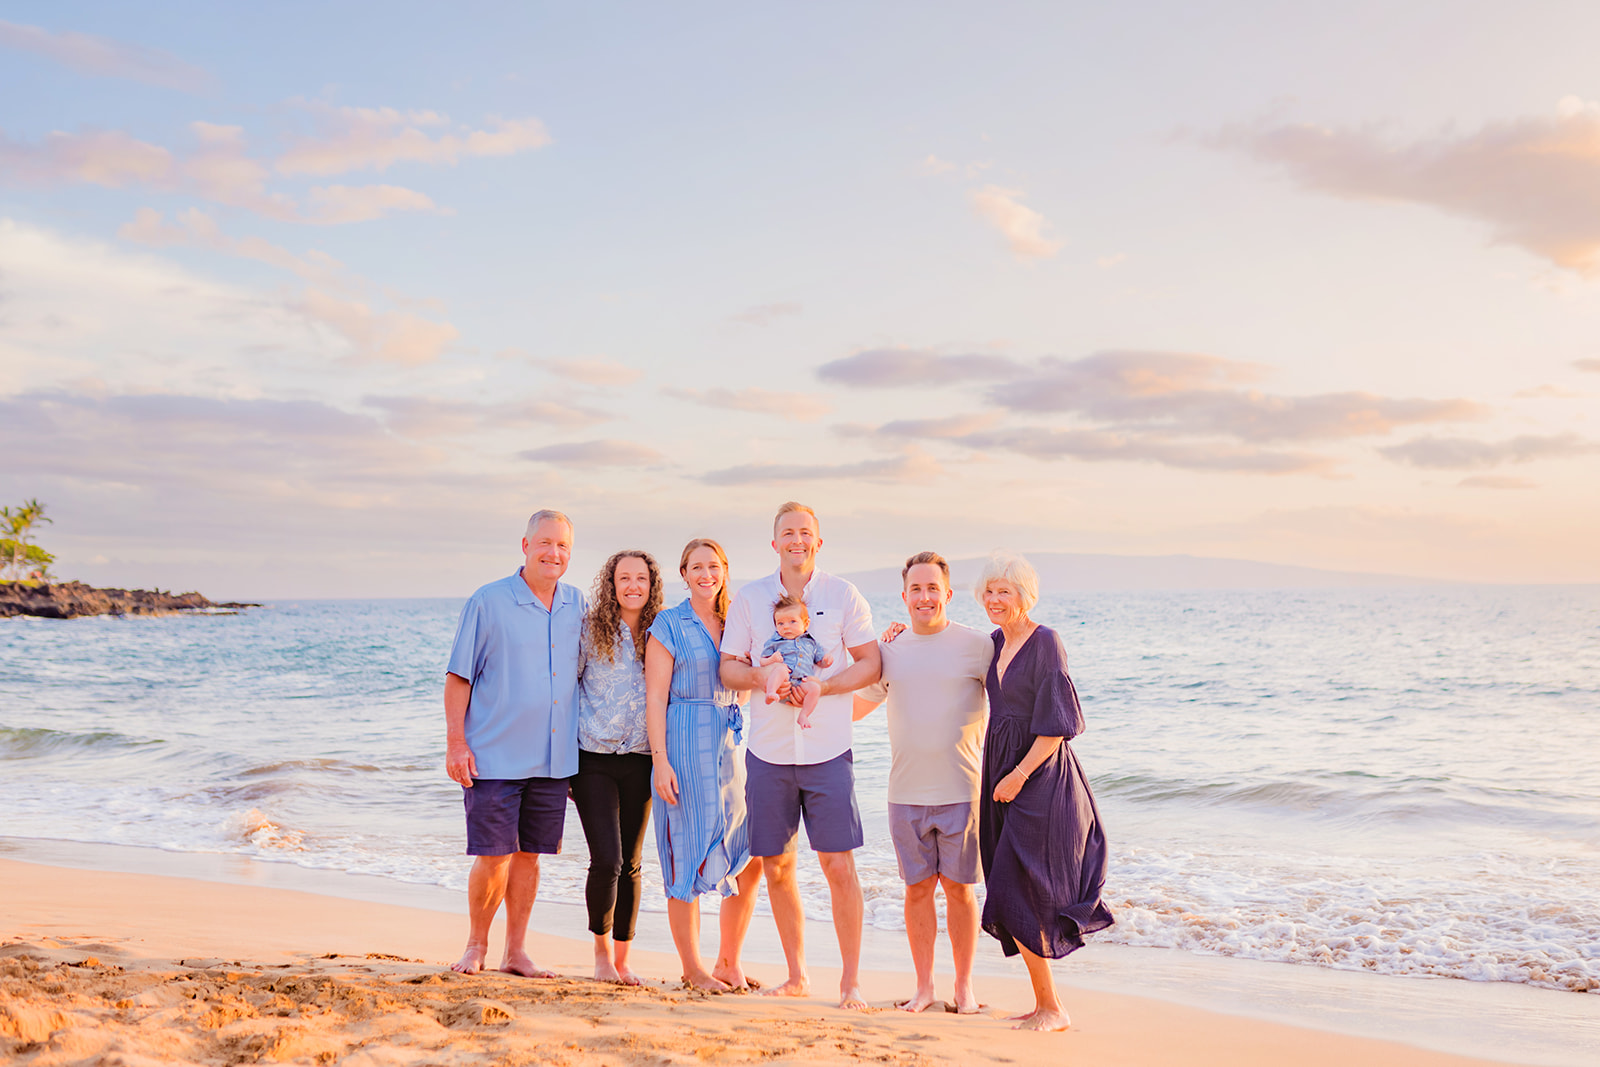 A family wearing white and blue stands together for family beach pictures on Maui, Hawaii at sunset.